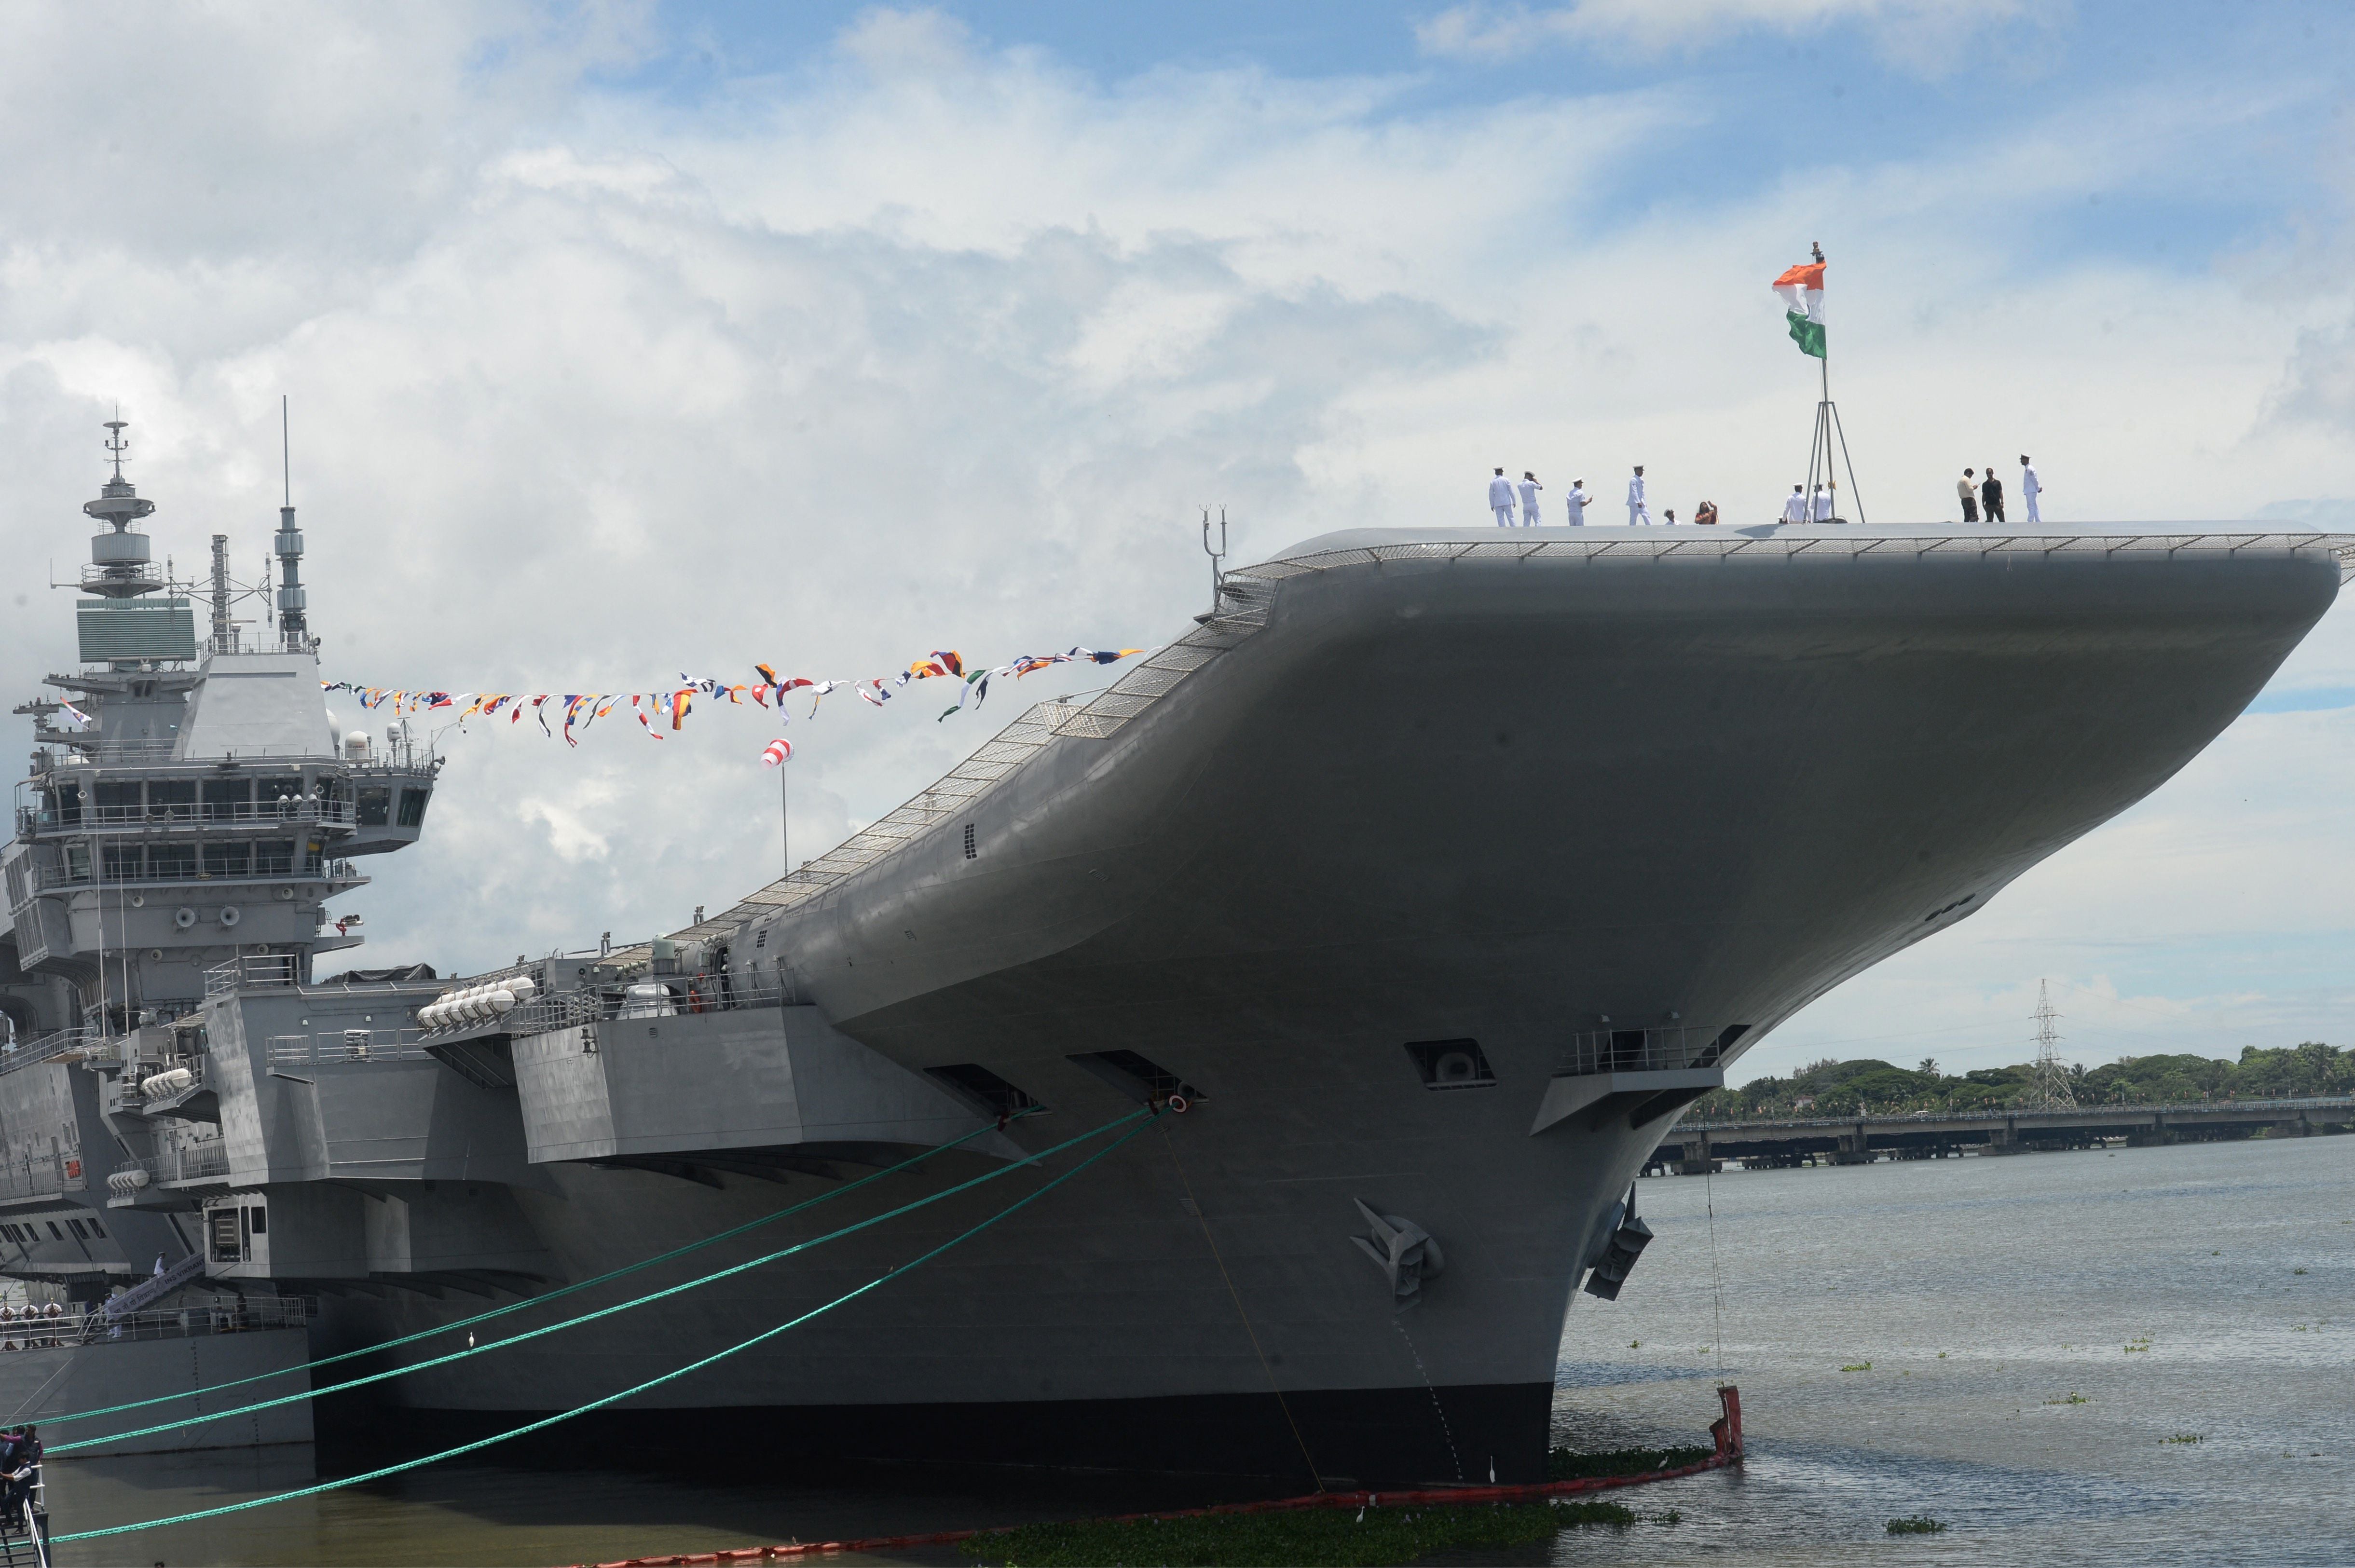 Narendra Modi commissions India's first domestically produced aircraft  carrier in major advance for military